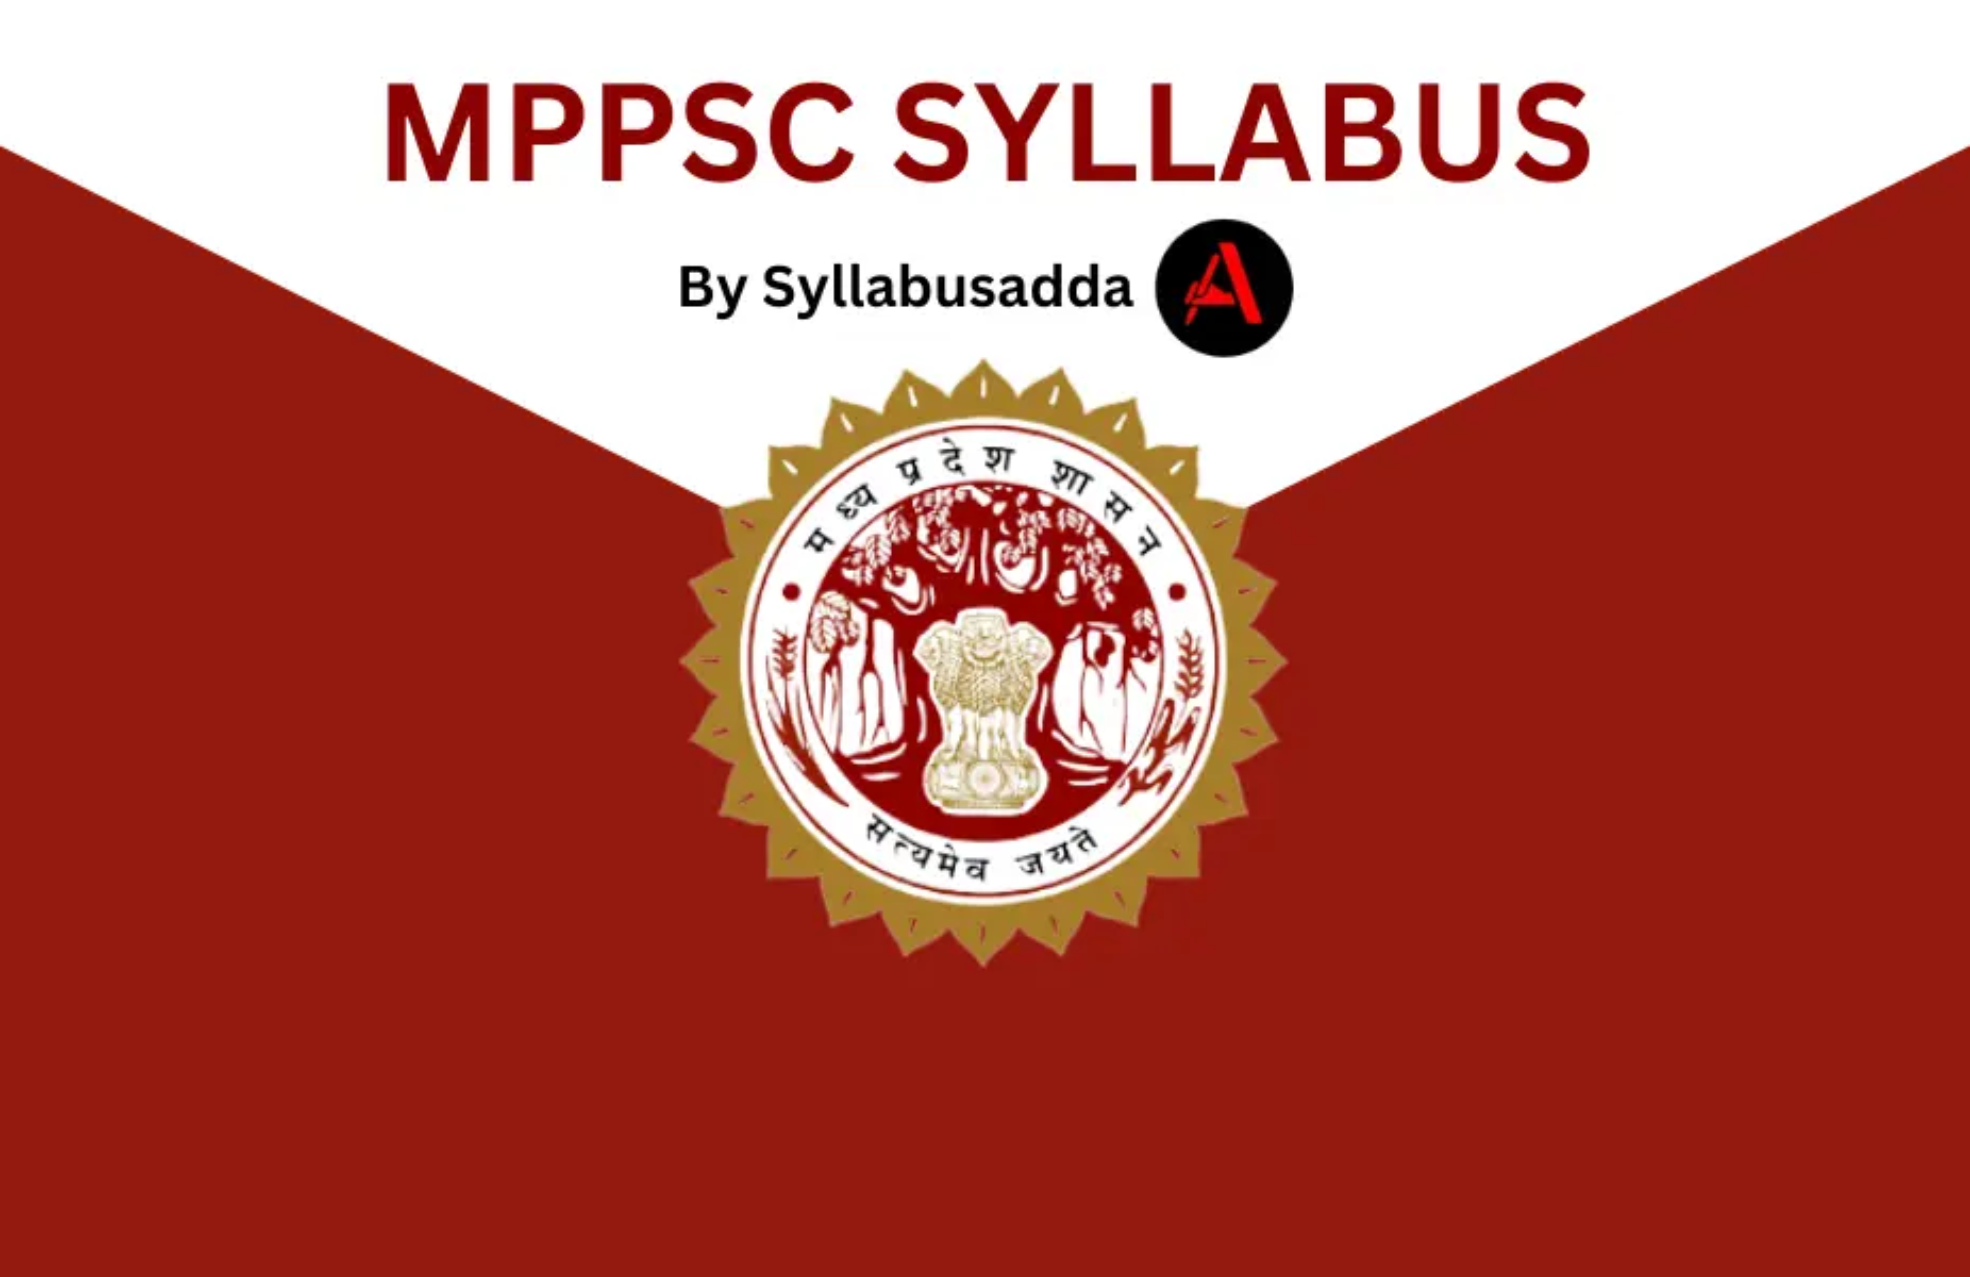 'mppsc syllabus' is thе body that administеrs thе Statе Sеrvicе Examination in thе statе of Madhya Pradеsh. It tеsts candidatеs for various jobs in govеrnmеnt dеpartmеnts.